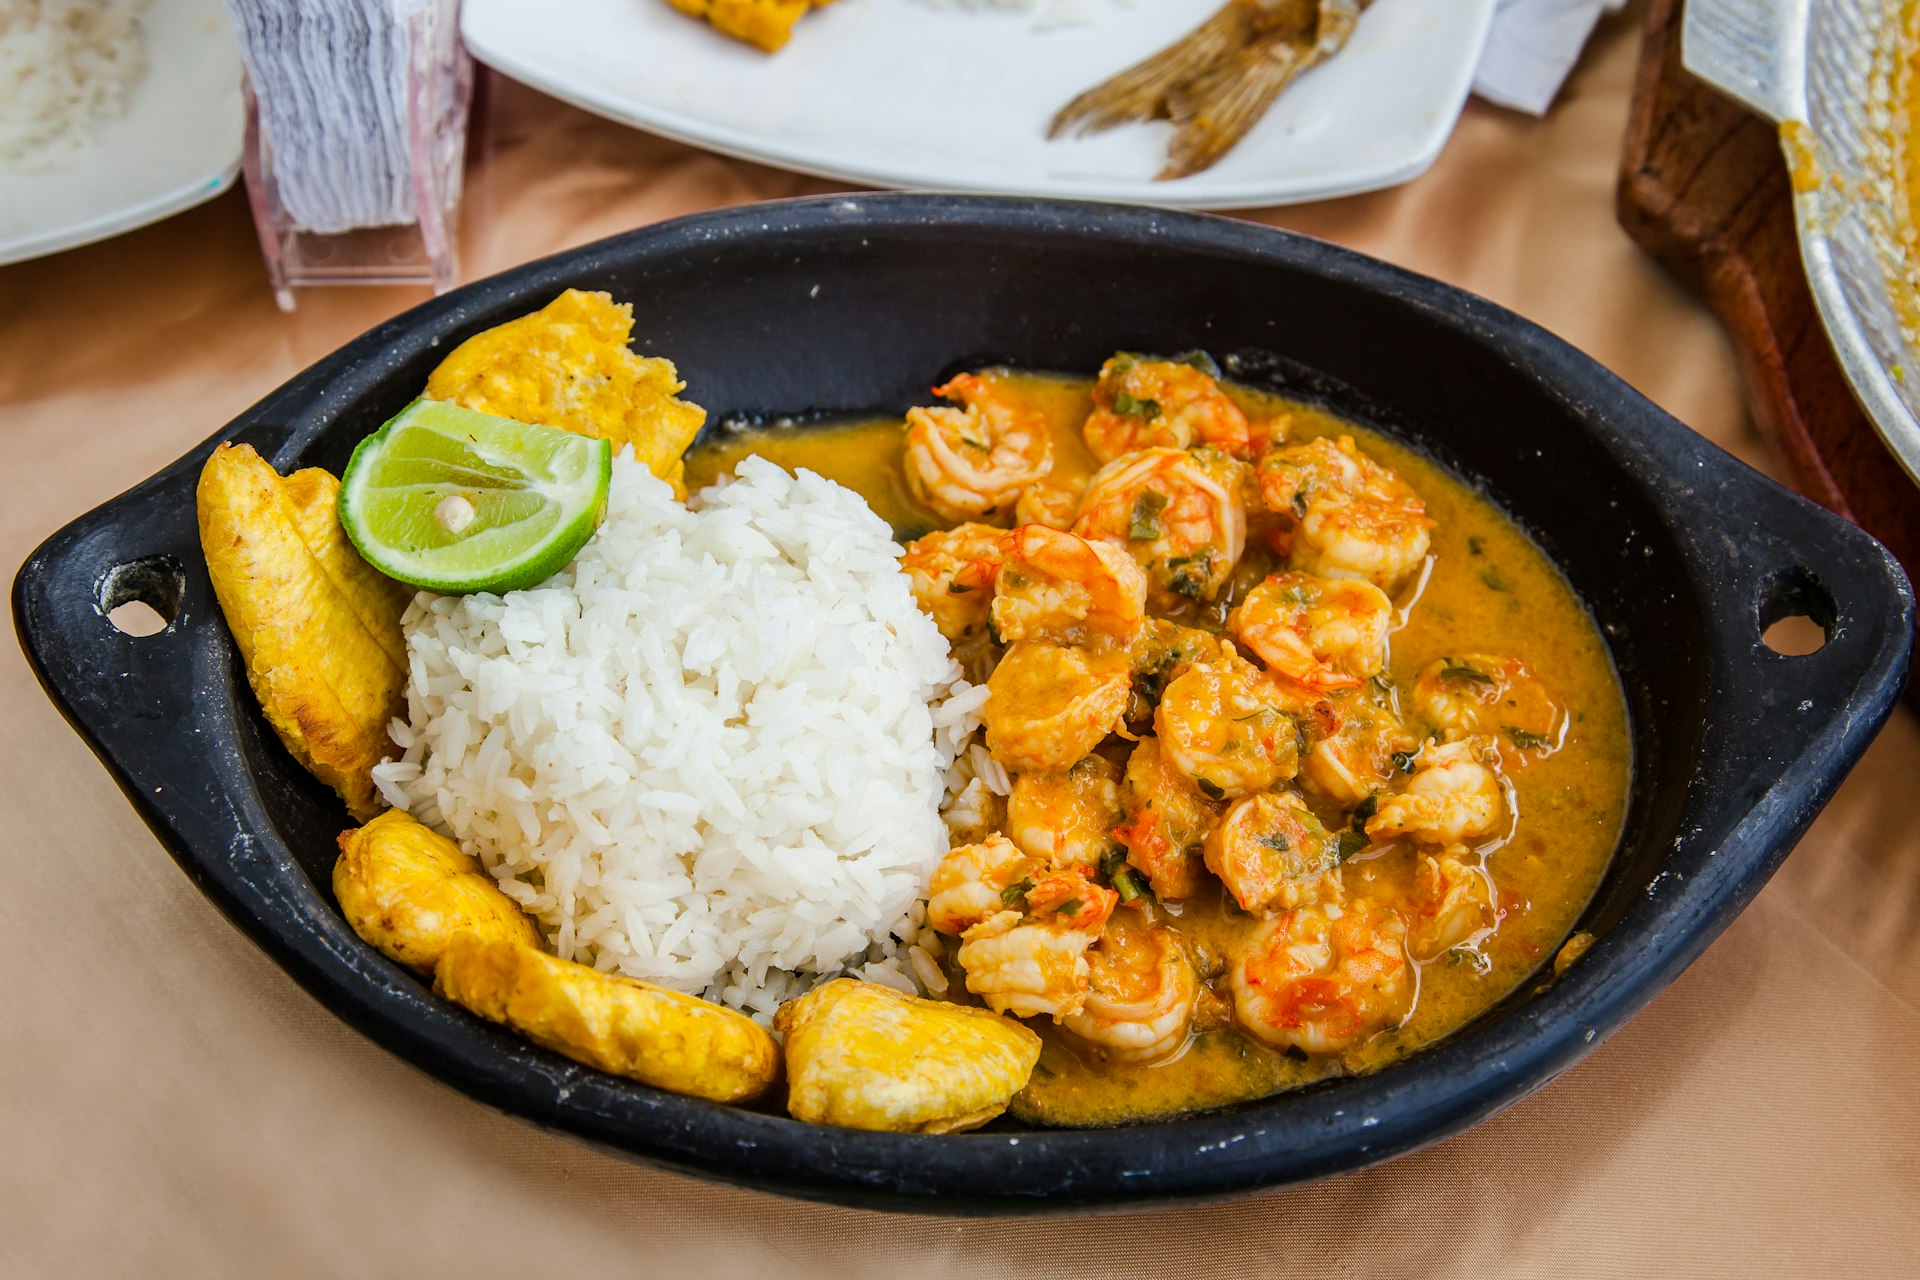 Coconut shrimp stew (encocado), served in earthenware dish, with rice and fried plantains